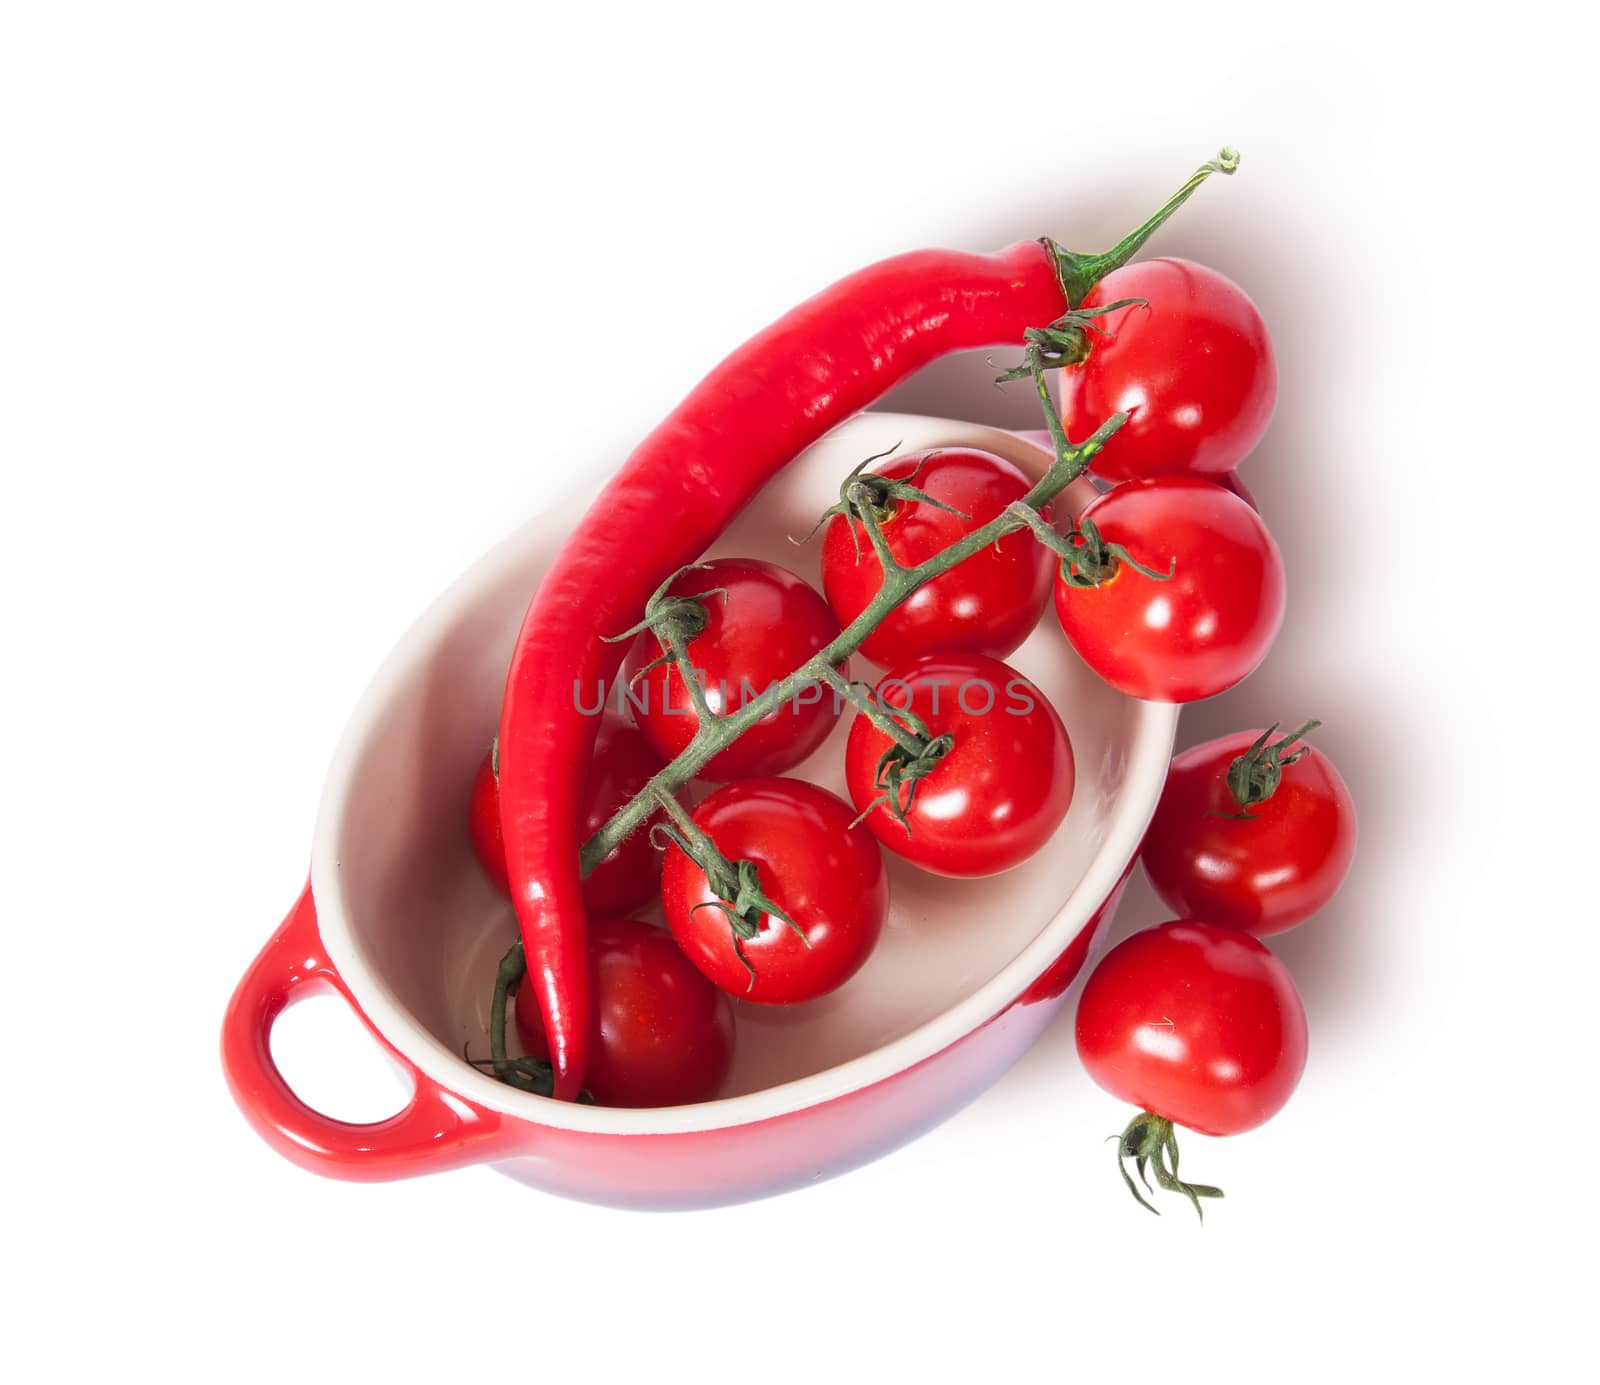 Cherry tomatoes and chili peppers in the saucepan top view by Cipariss